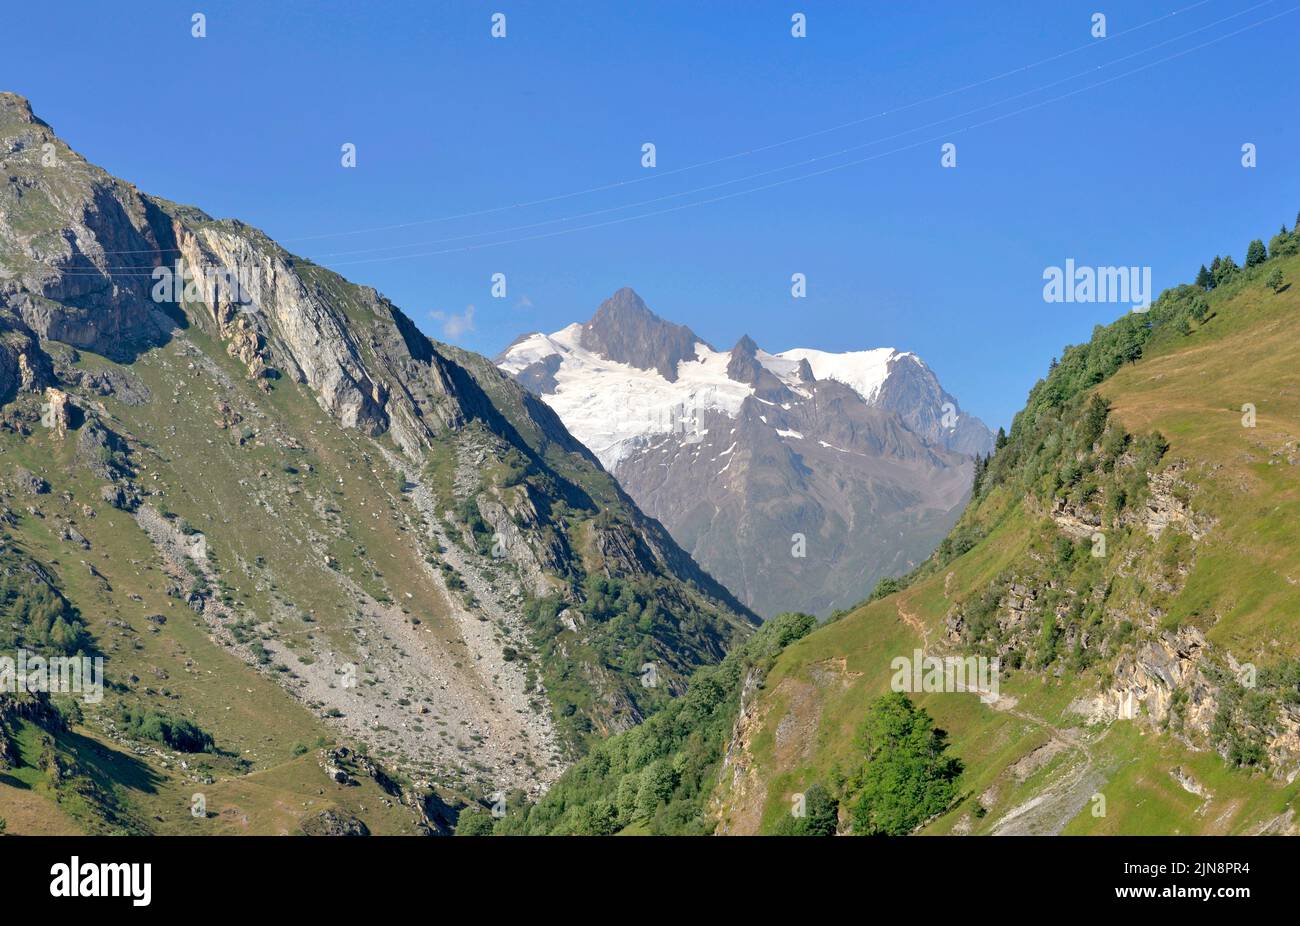 view on a glacier of the Mont Blanc massif between mountains under clear blue sky in Tarentaise Stock Photo